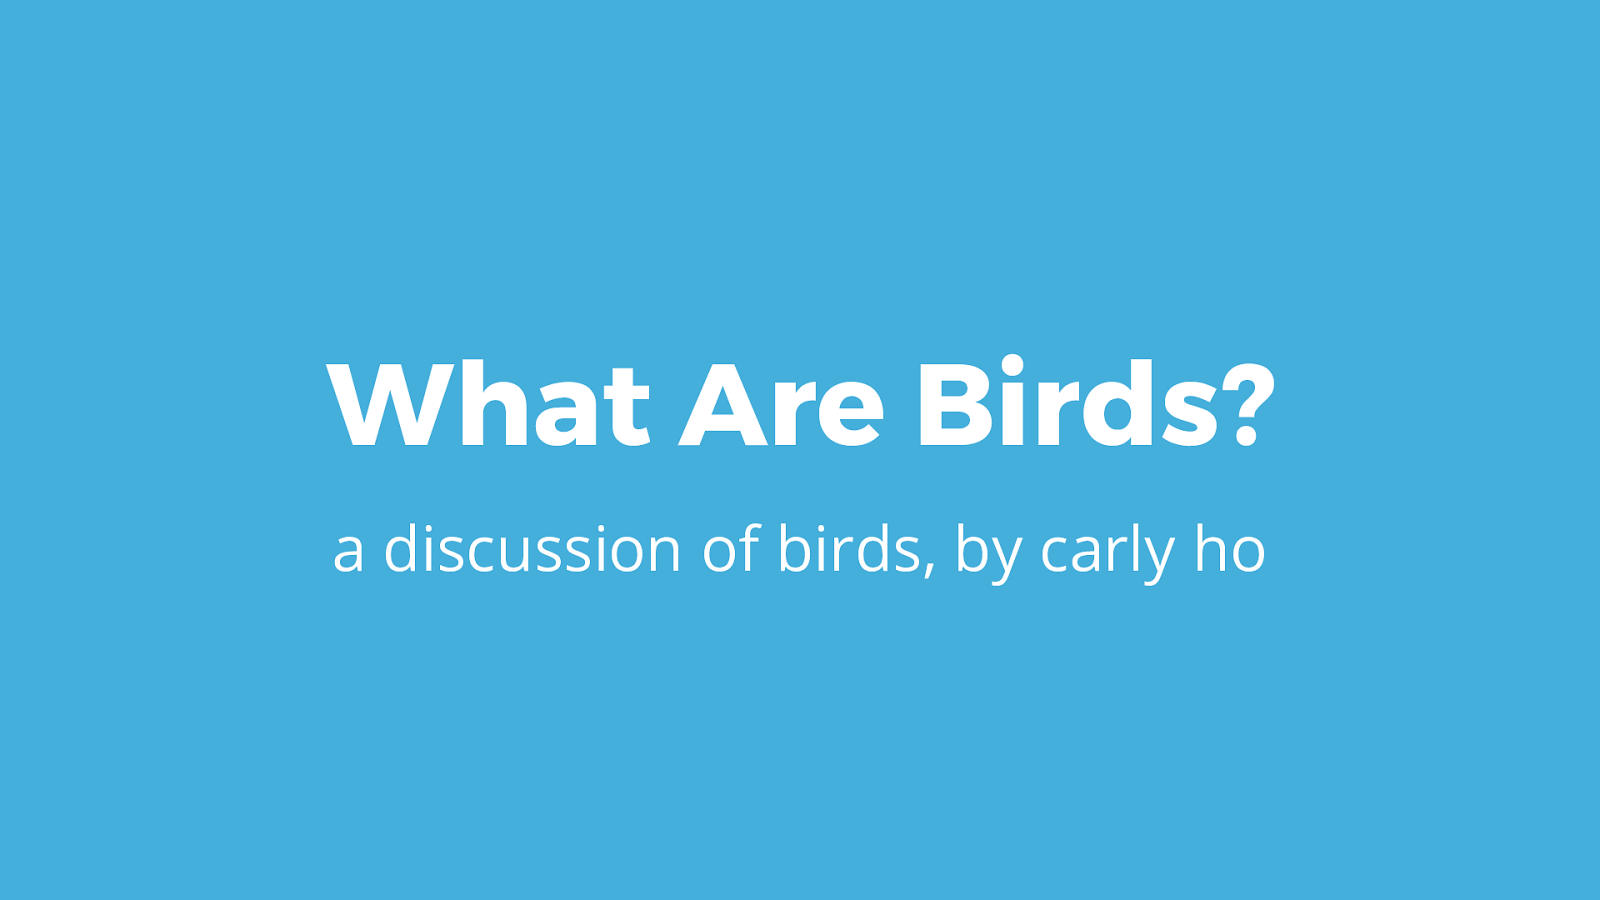 What are birds?